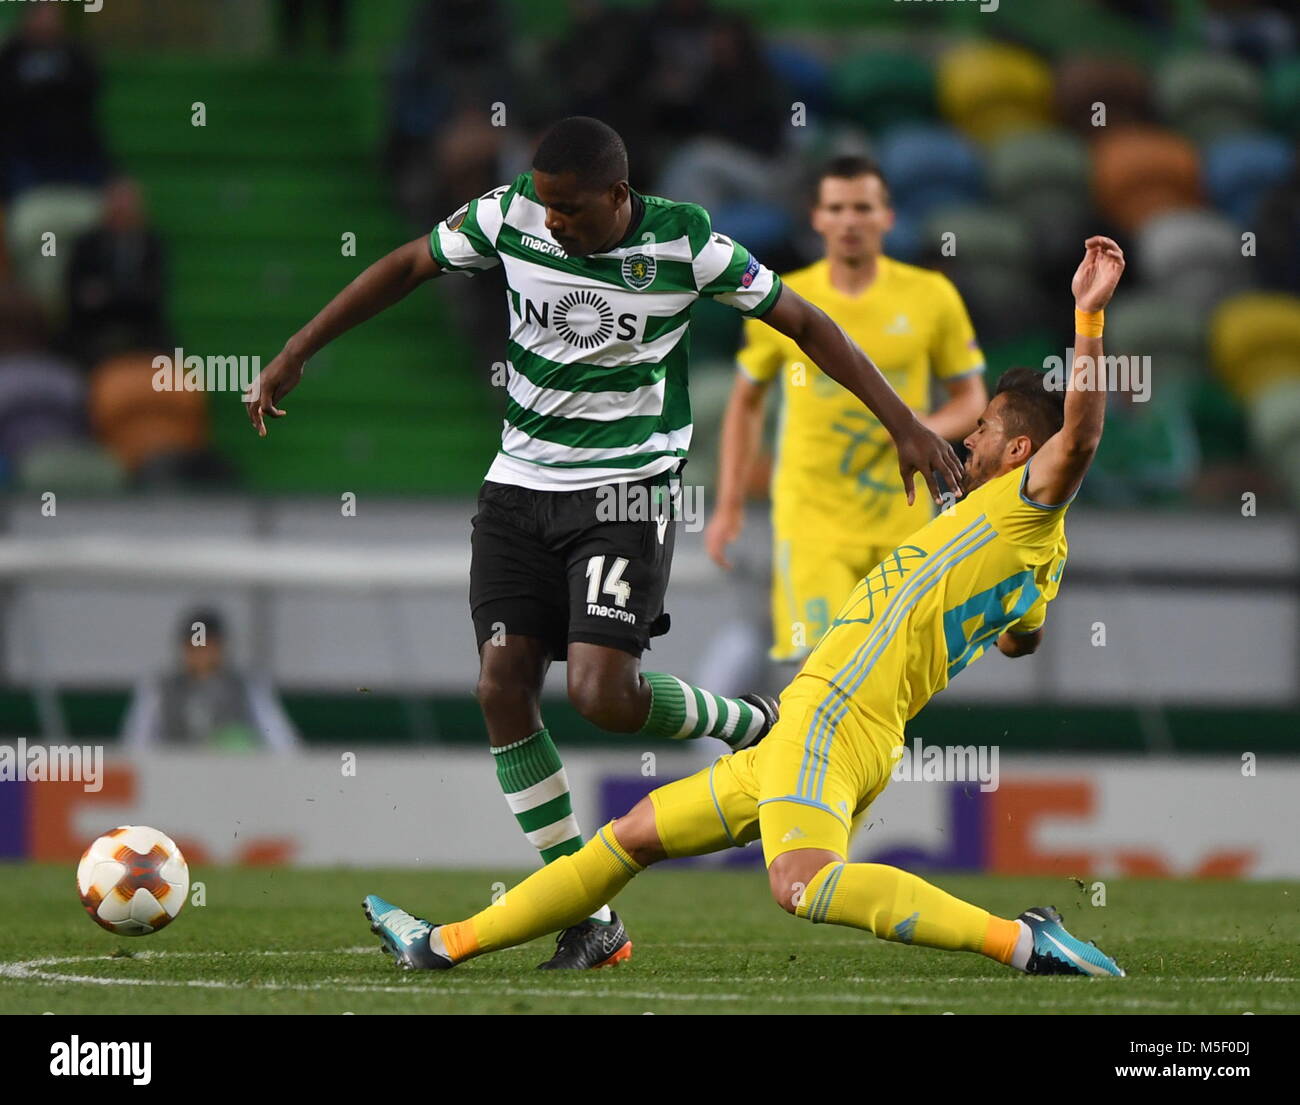 (180223) -- LISBON, Feb. 23, 2018 (Xinhua) -- William Carvalho (L) of Sporting vies for the ball with Marko Stanojevic of Astana during the Europa League soccer match between Sporting CP and FC Astana at the Jose Alvalade stadium in Lisbon, Portugal, on Feb. 22, 2018. The match ended with a 3-3 tie.(Xinhua/Zhang Liyun) Stock Photo